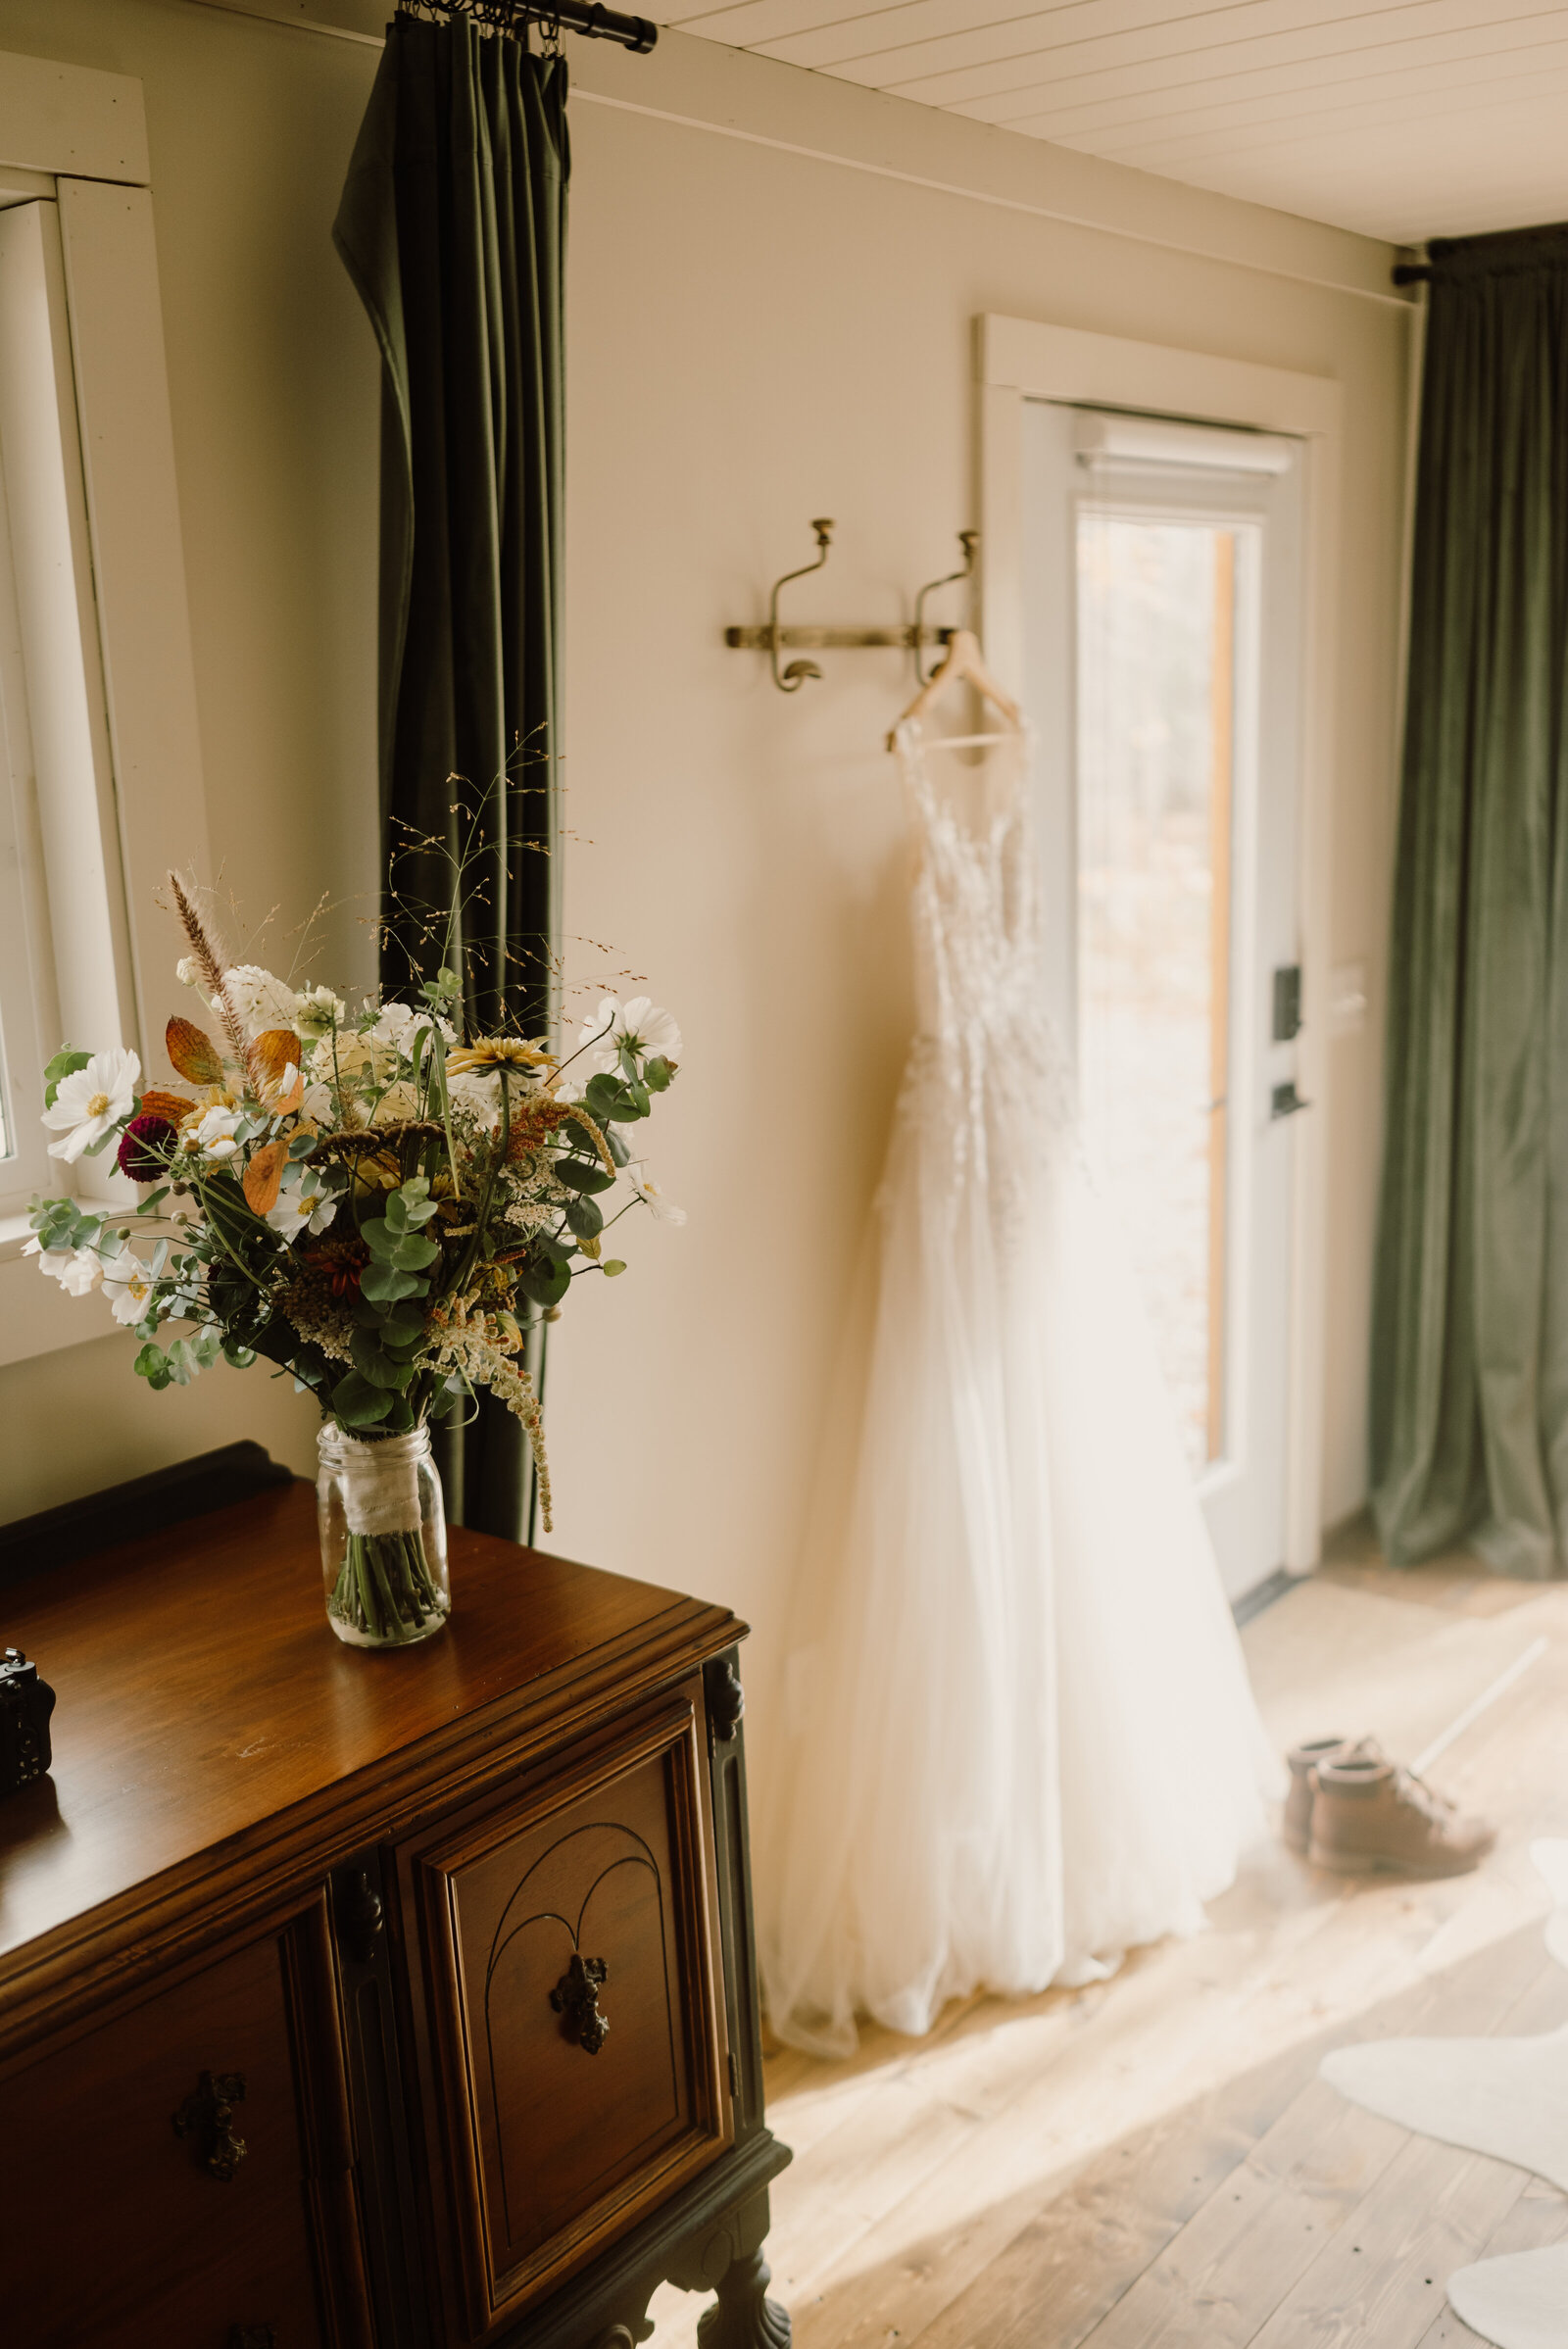 Bridal bouquet placed on vintage dresser with a wedding gown hanging in a cabin